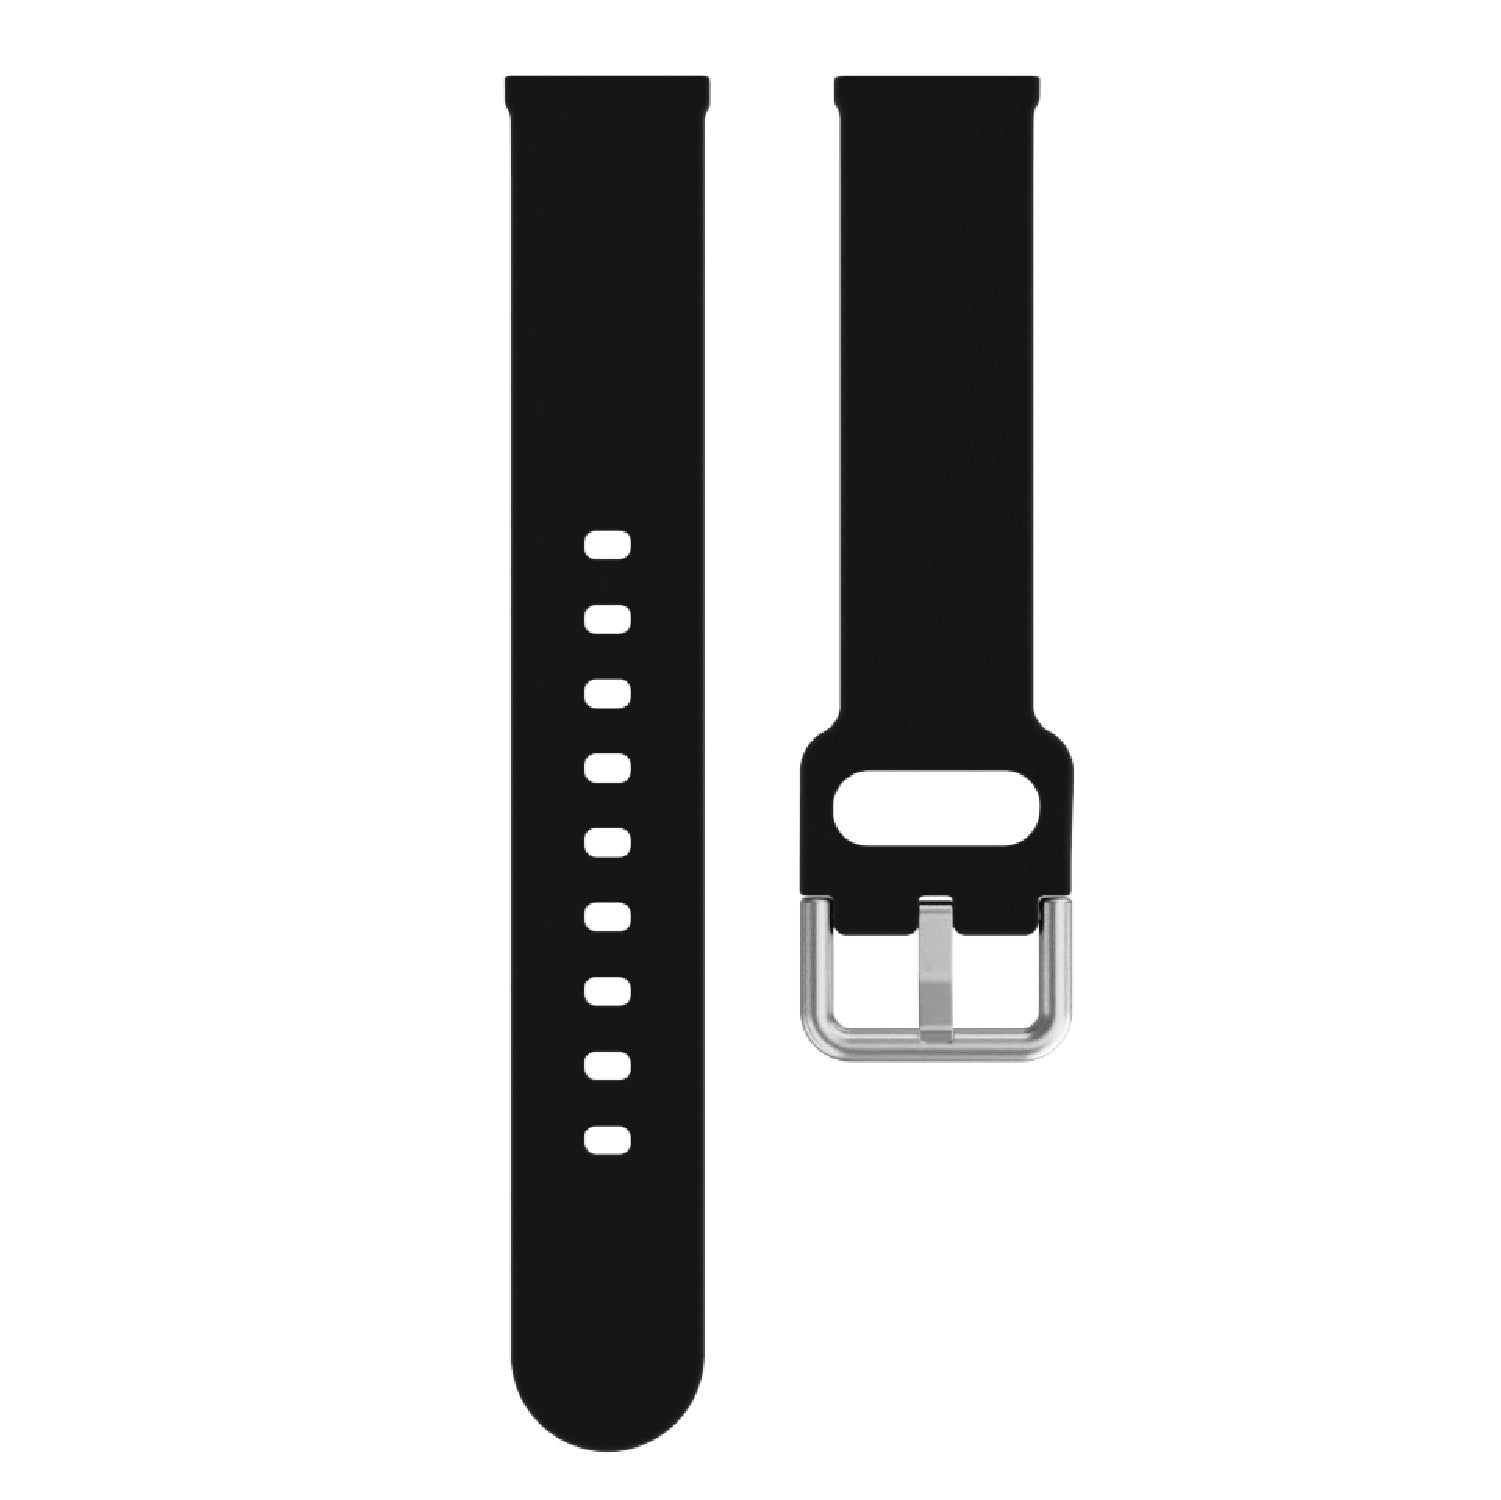 iTouch Air 3 40mm, Sport 3 & Sport Extra Interchangeable Strap: Narrow Black SIlicone affordable smart watch strap